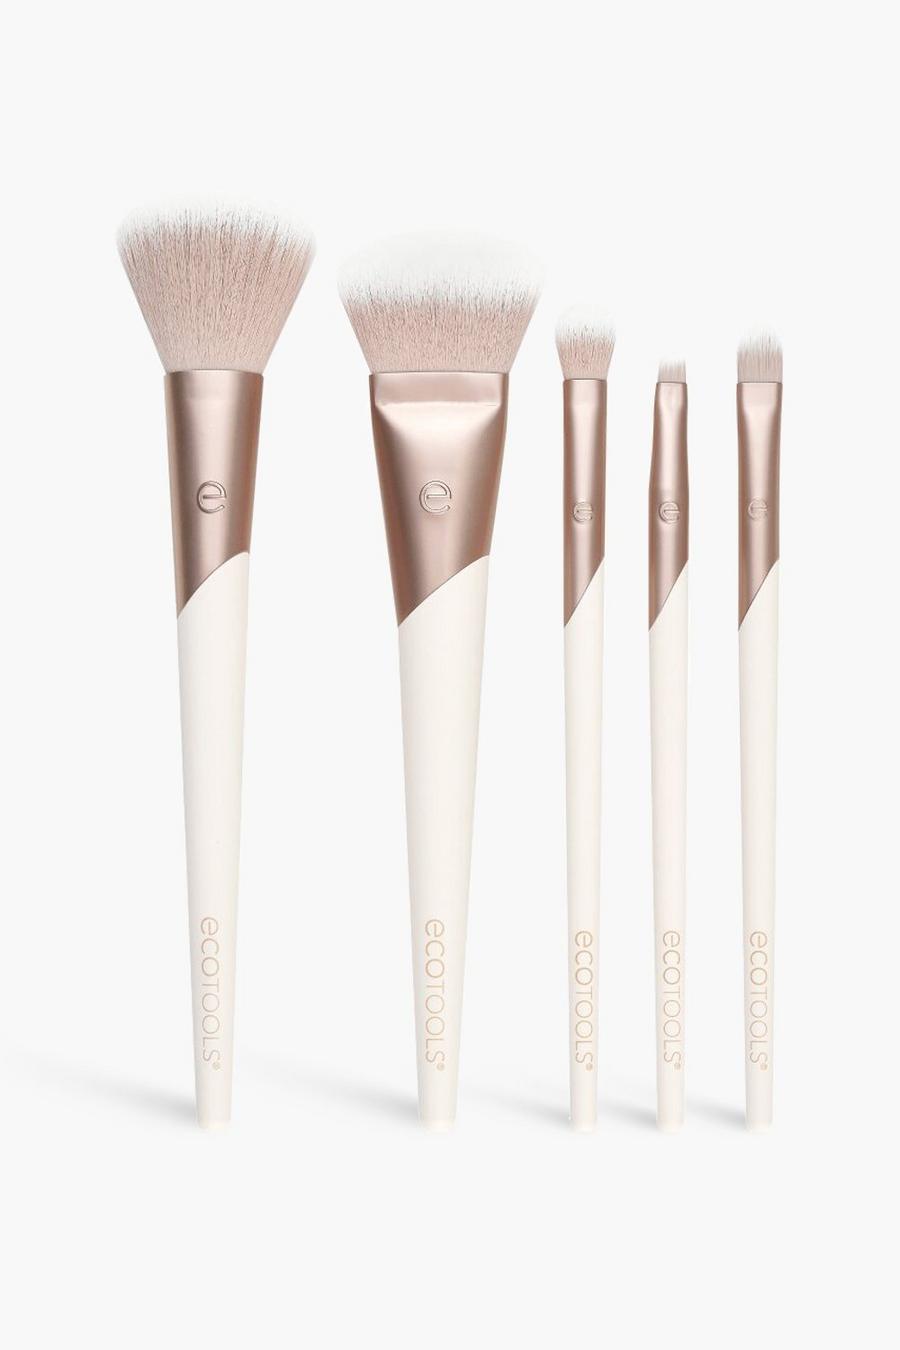 Ecotools - Kit di pennelli per make up Luxe Natural Elegance, Pink rosa